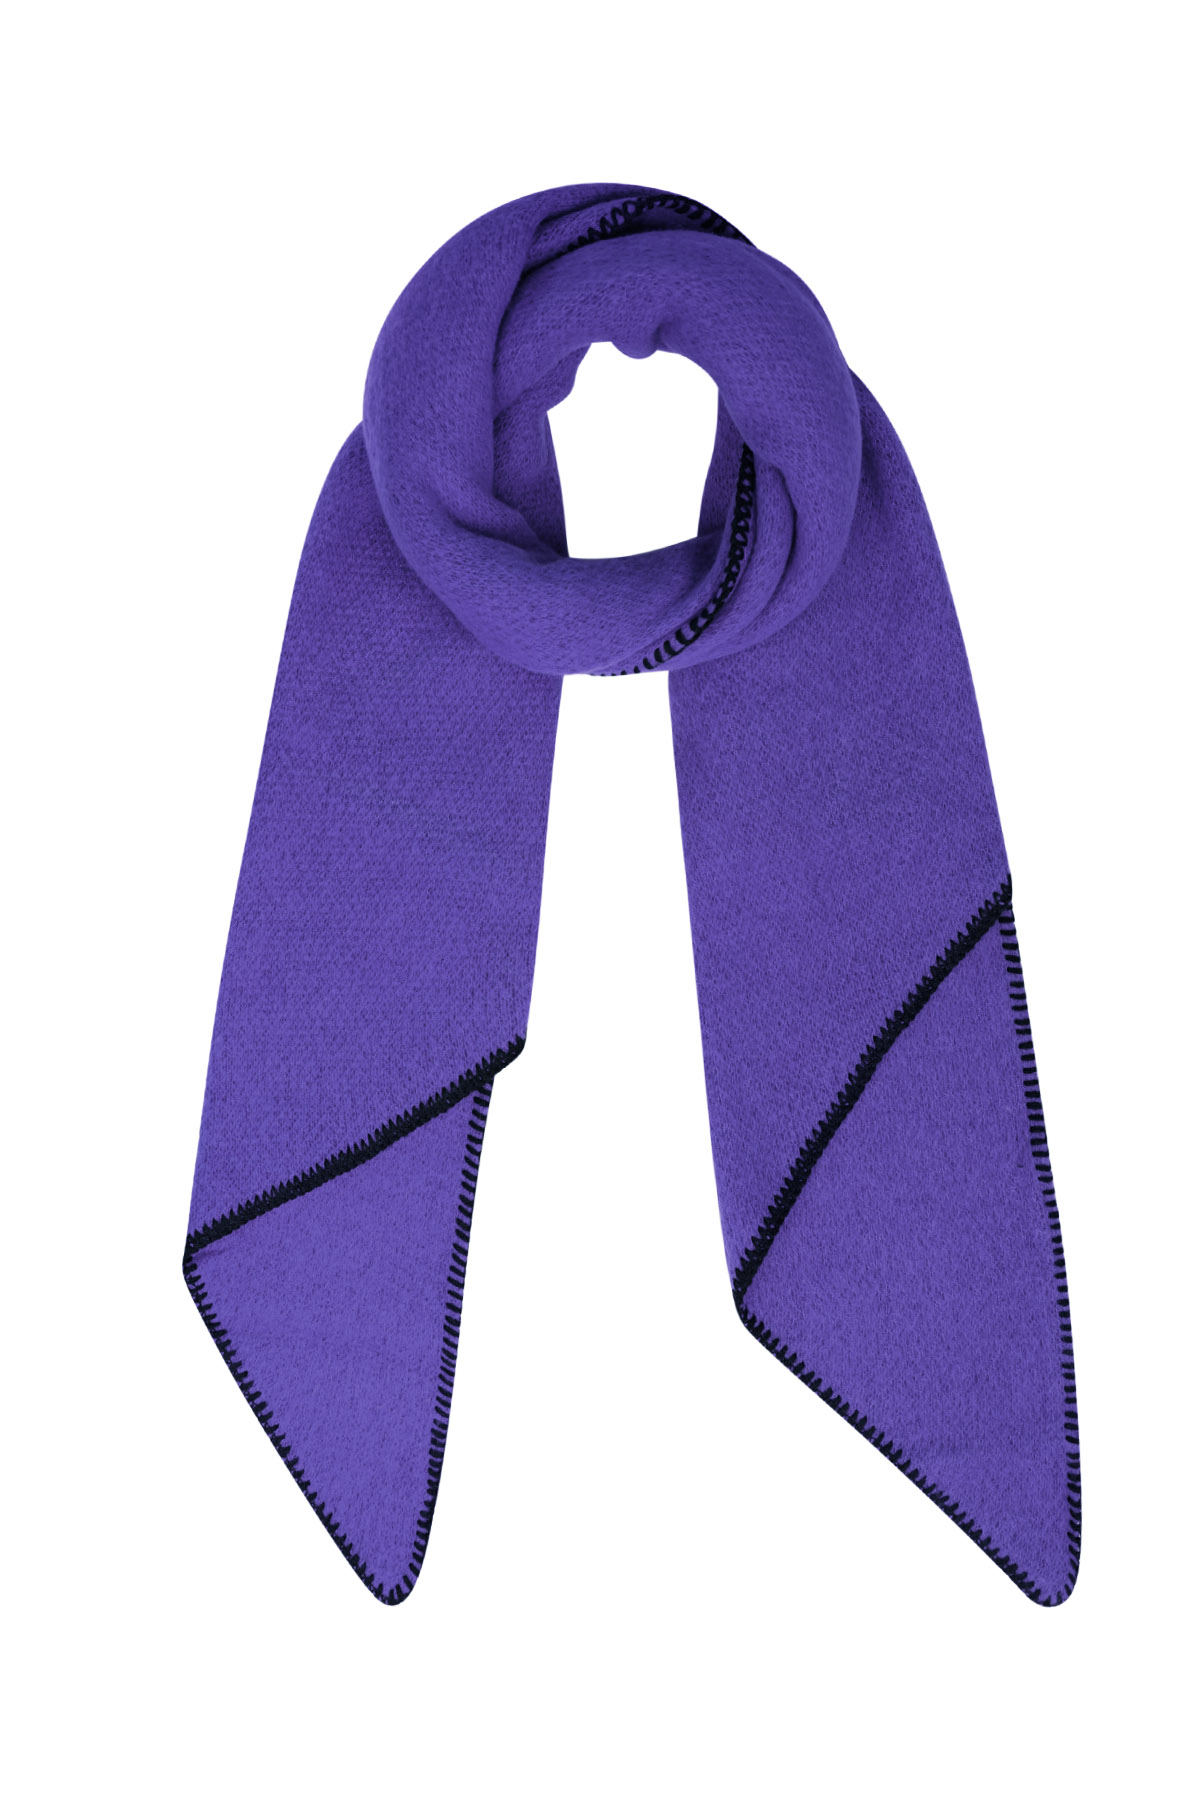 Single-colored winter scarf with black stitching - purple